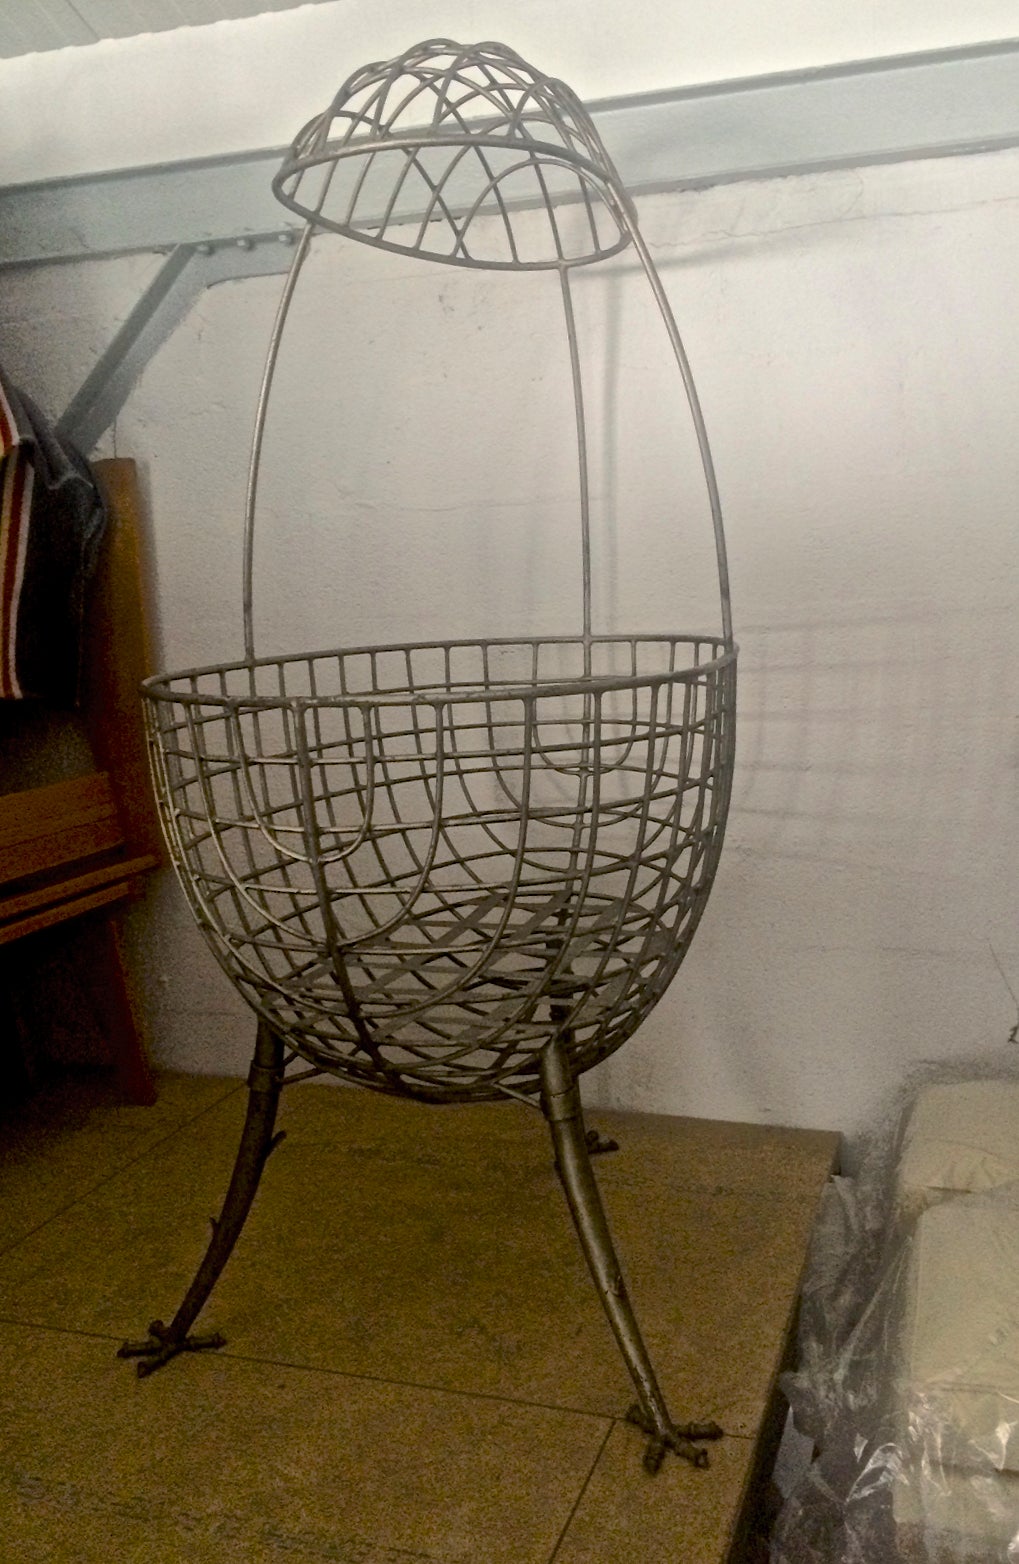 Awesome egg shaped cradle in sculptured wrought iron with chicken legs.